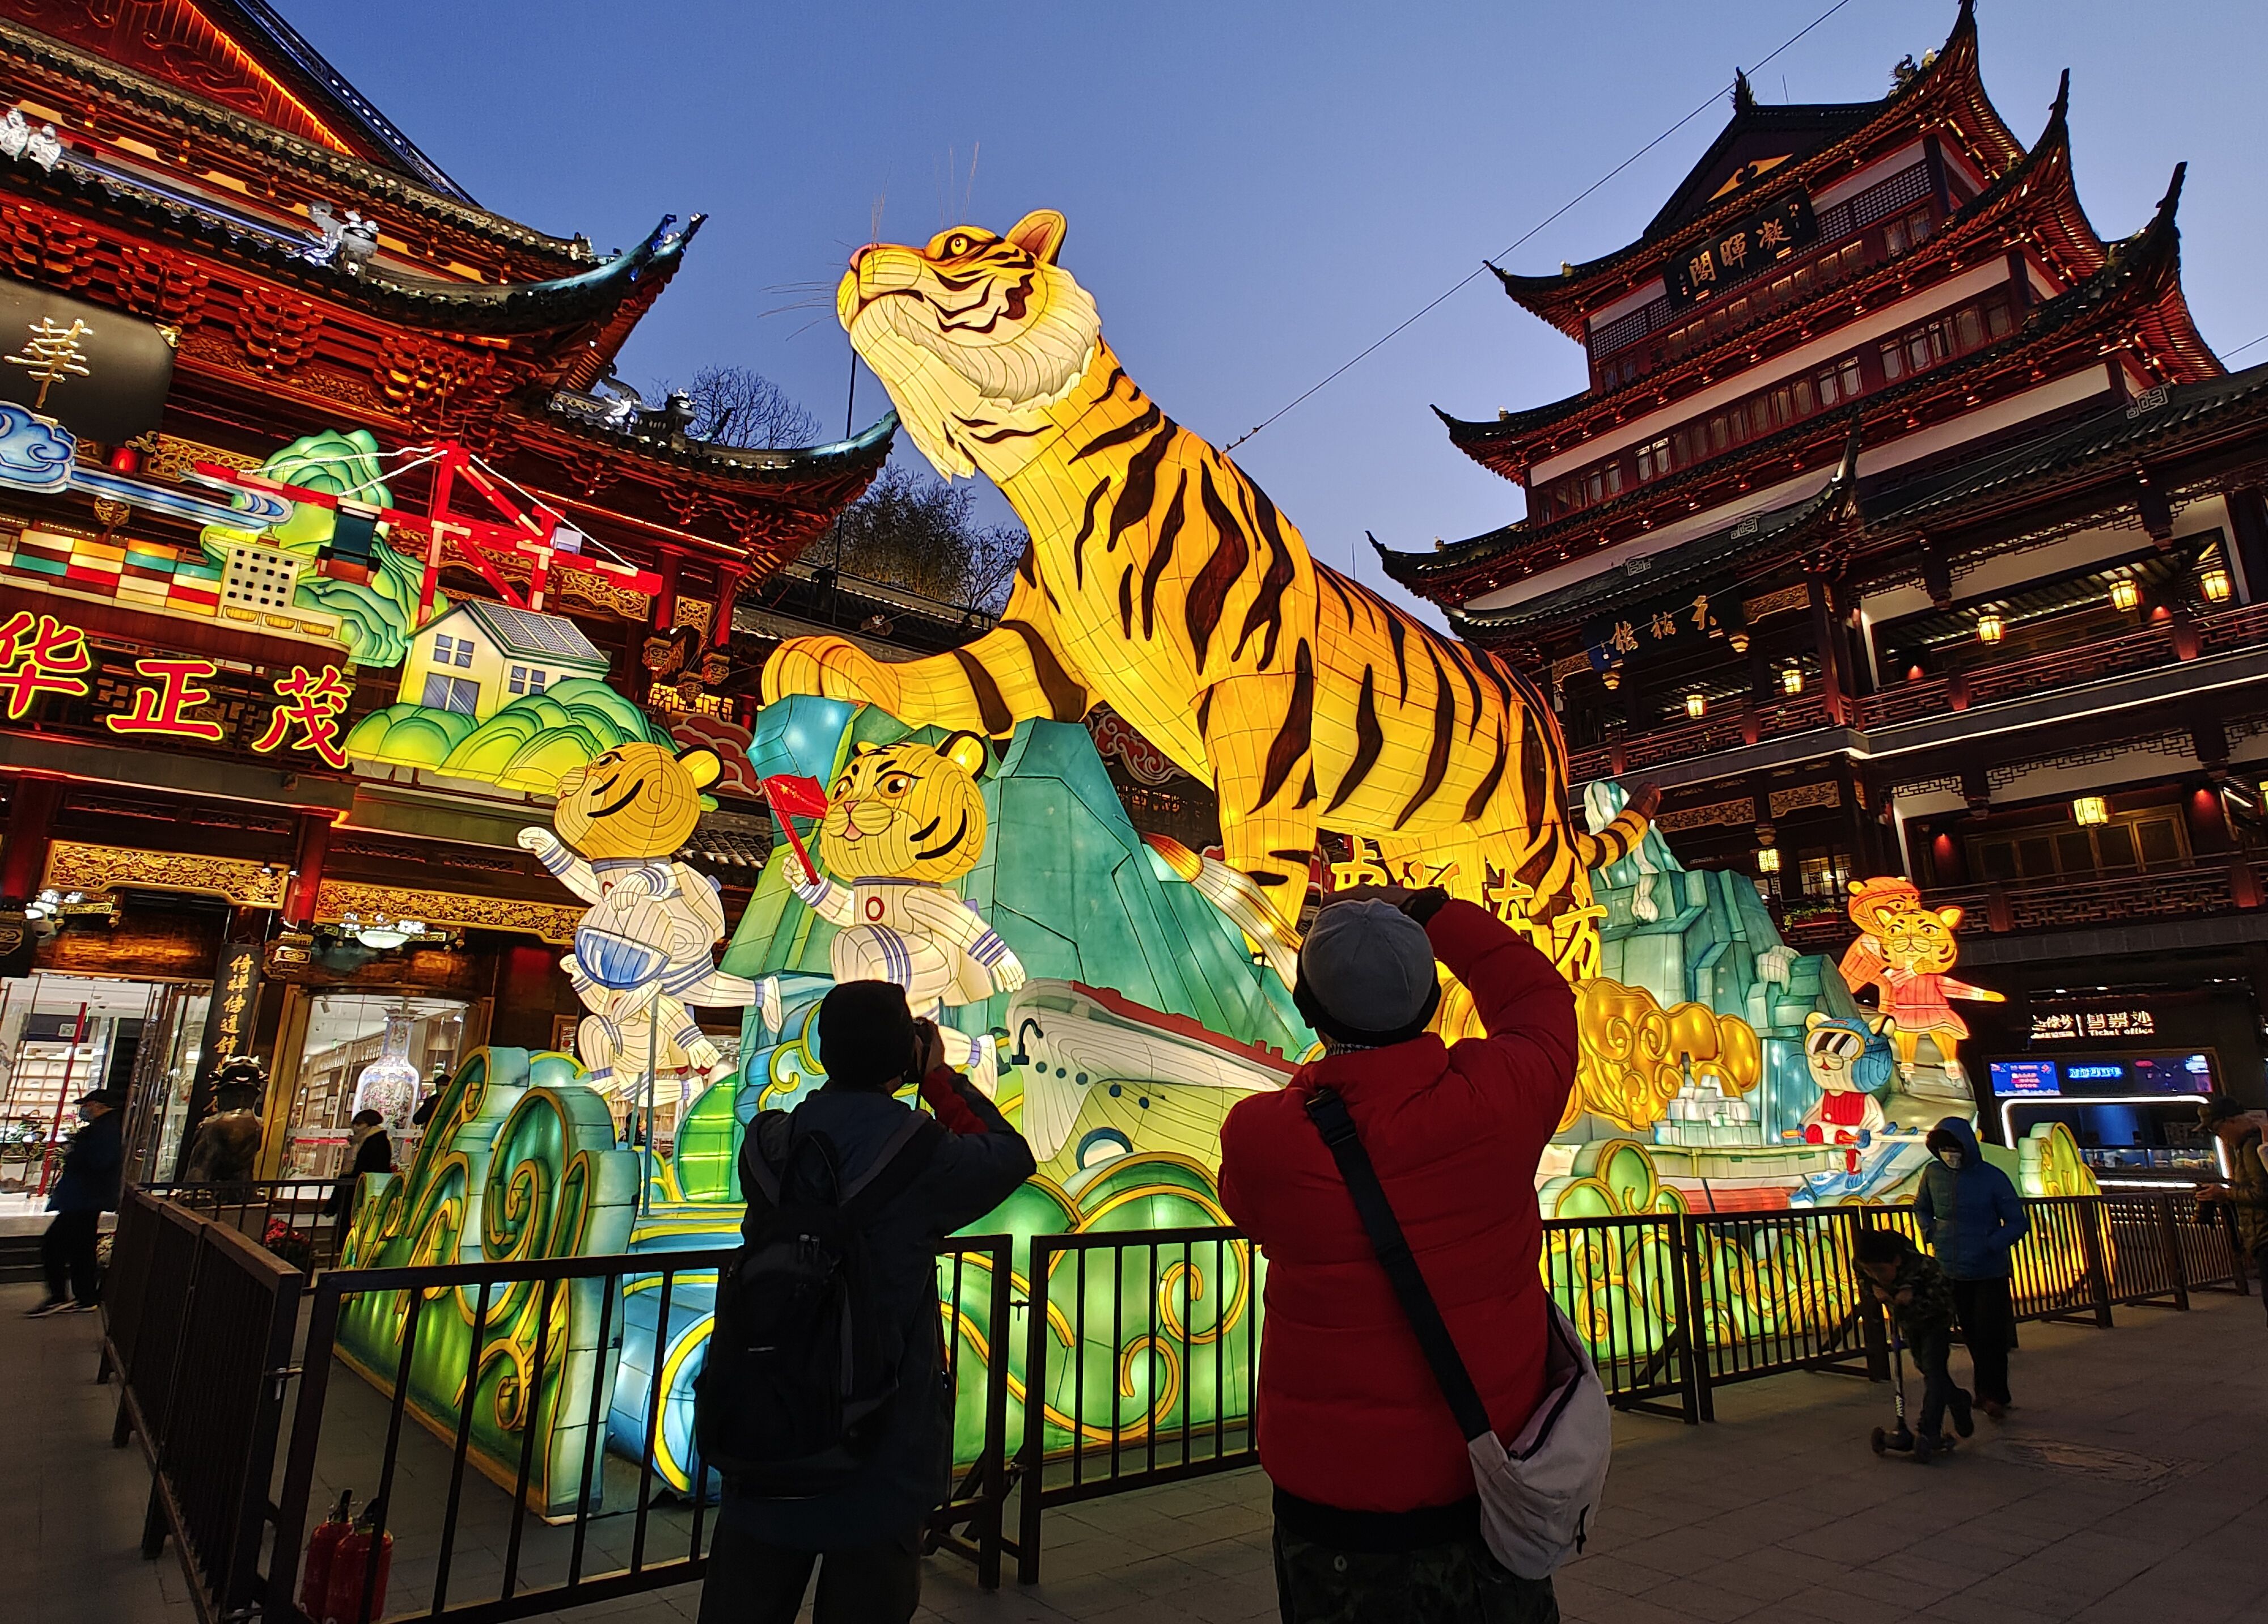 Lunar New Year 2022: Welcoming the Year of the Tiger